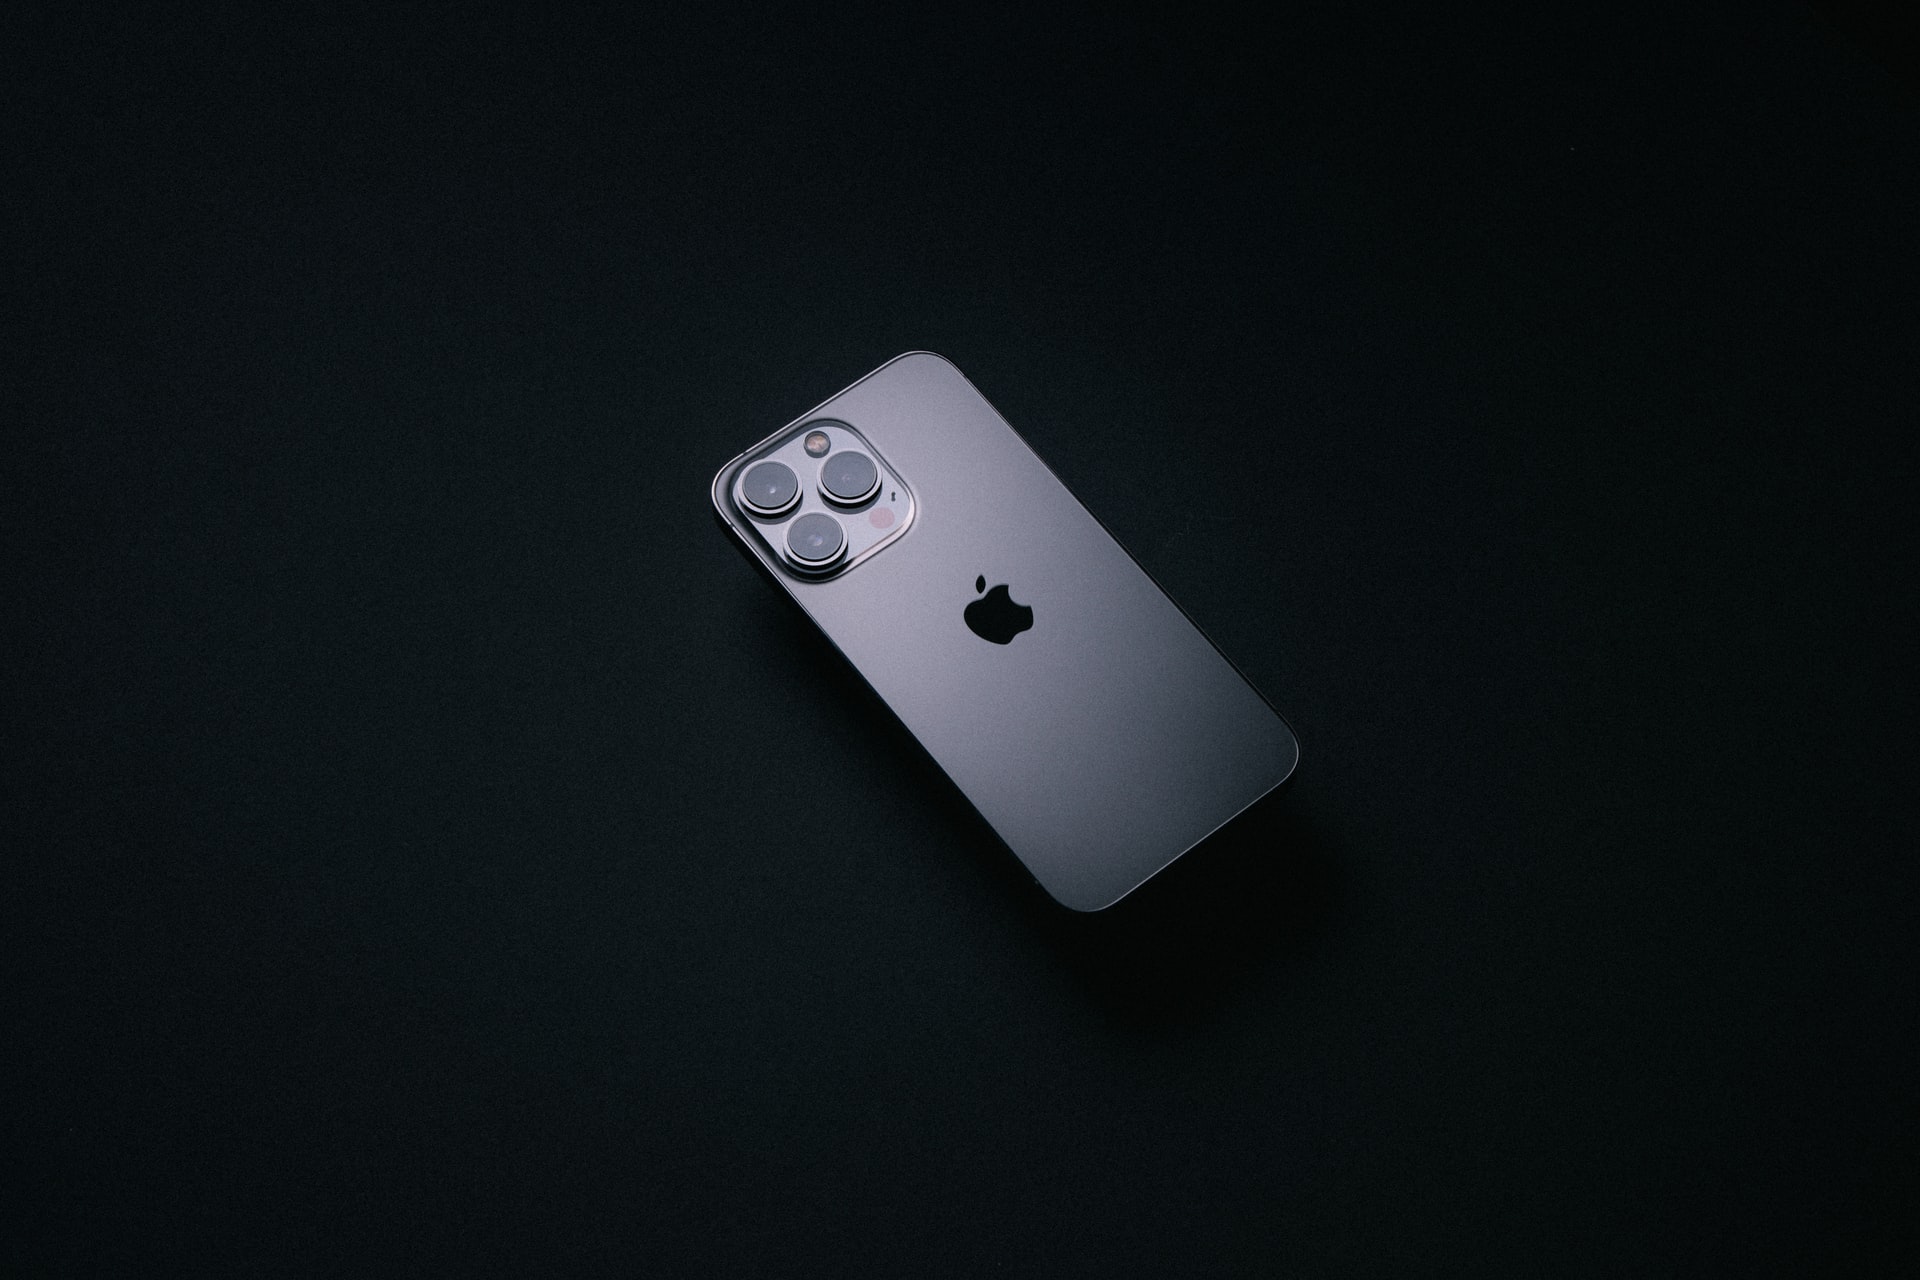 Shadowy photo of a grey iPhone 13 Pro Max in the dark